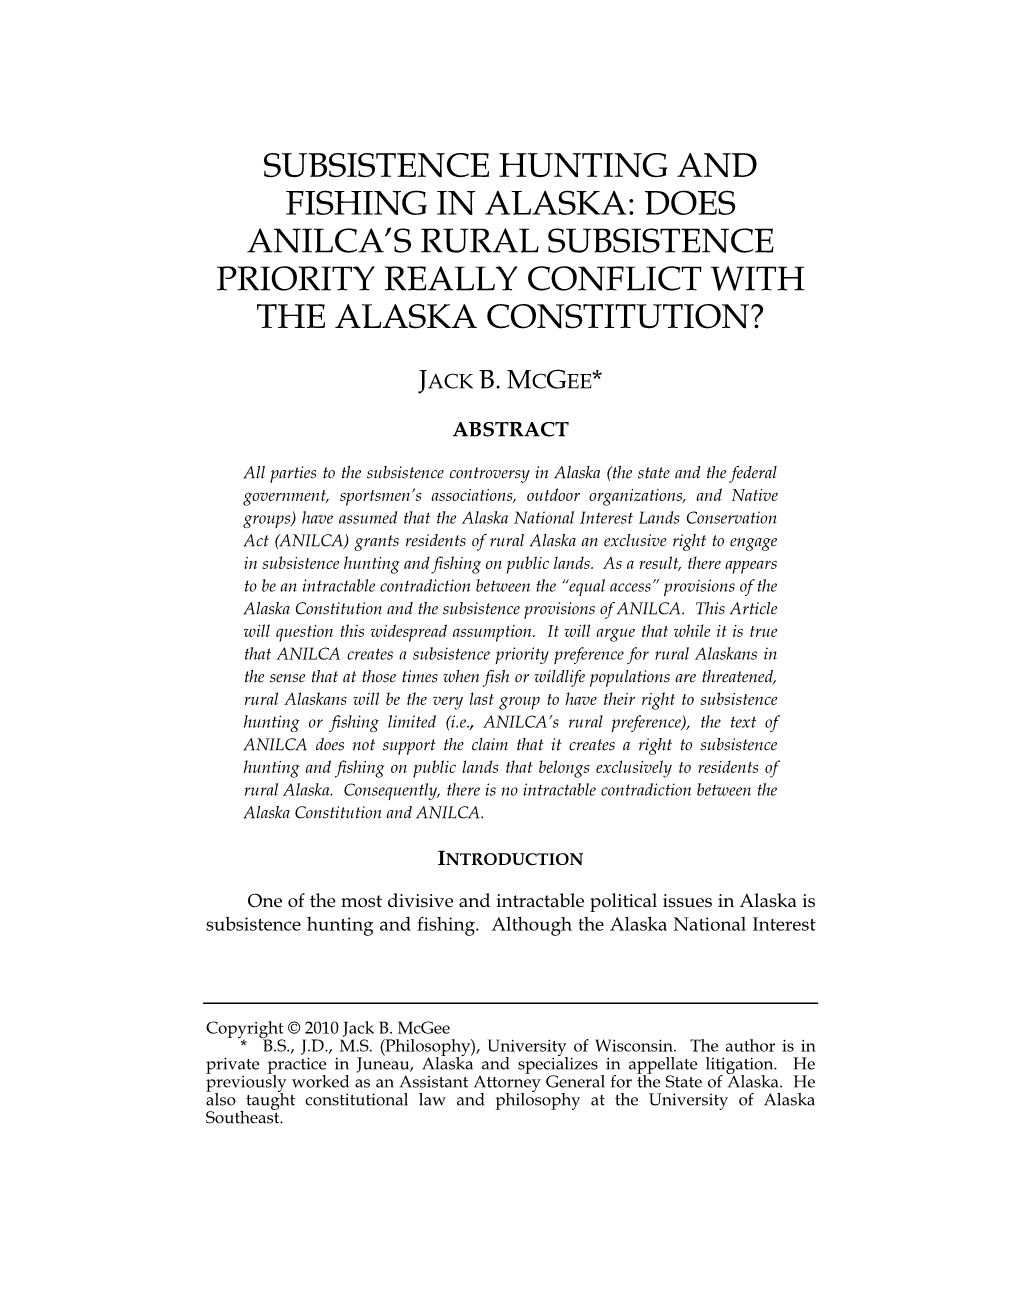 Subsistence Hunting and Fishing in Alaska: Does Anilca’S Rural Subsistence Priority Really Conflict with the Alaska Constitution?